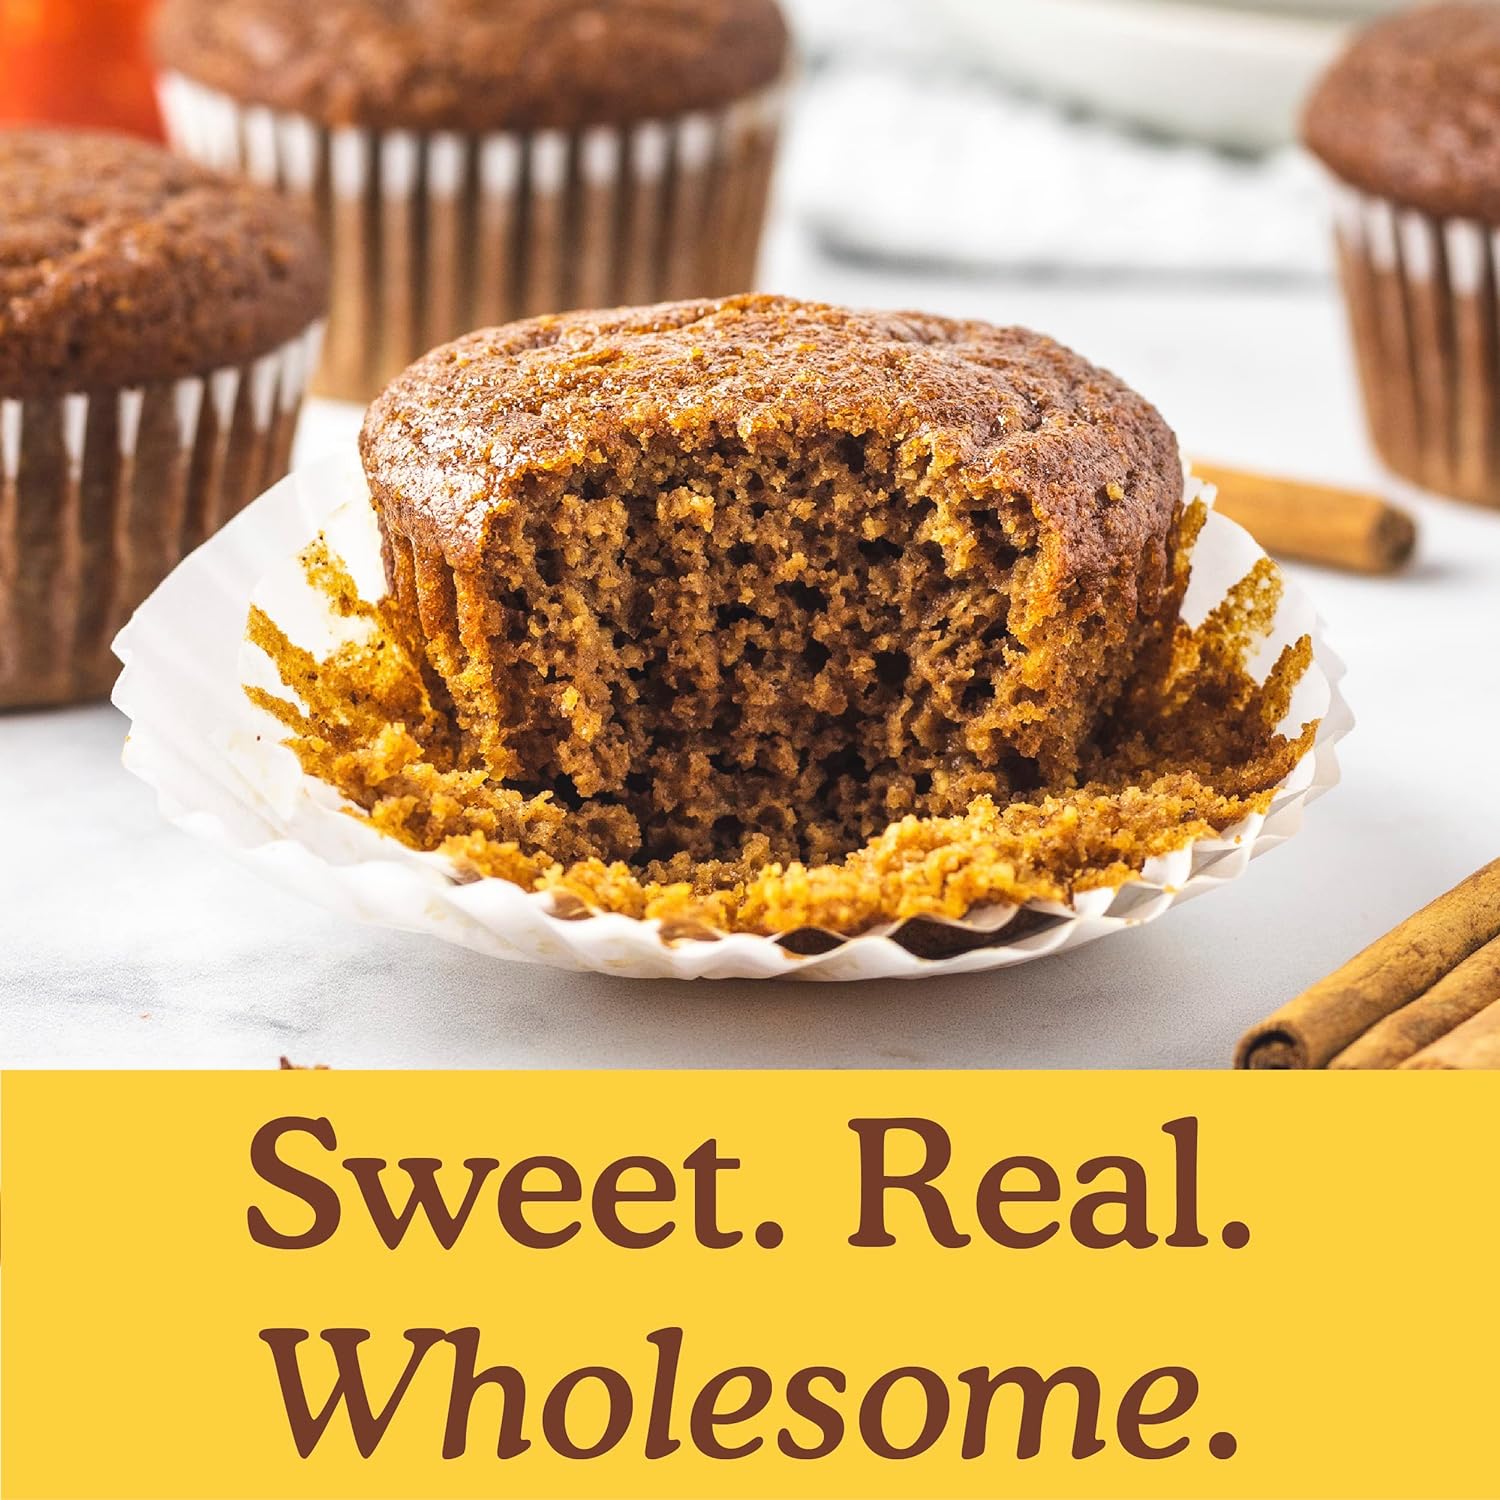 Simple Mills Almond Flour Baking Mix, Pumpkin Muffin & Bread Mix - Gluten Free, Plant Based, Paleo Friendly, 9 Ounce (Pack of 1) : Grocery & Gourmet Food